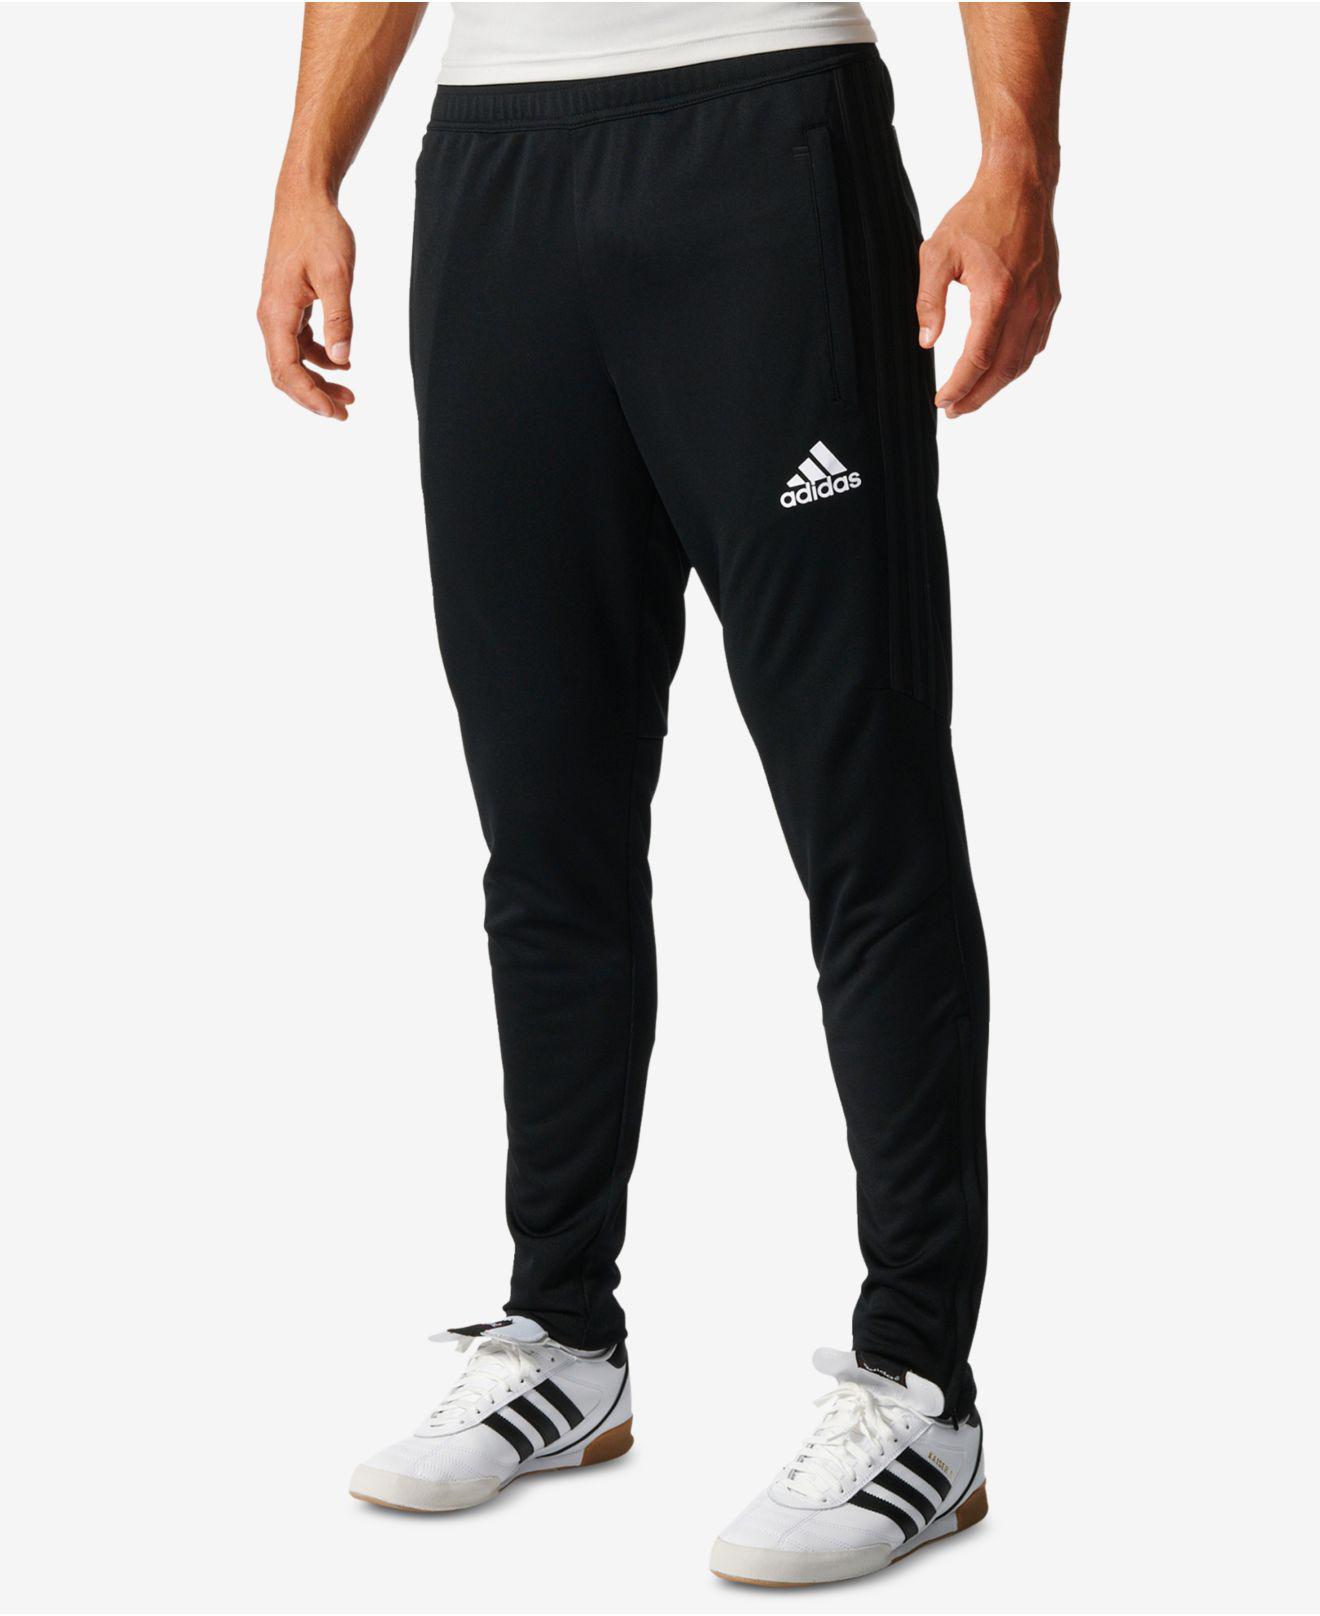 adidas color youth climacool pants black boots outfit